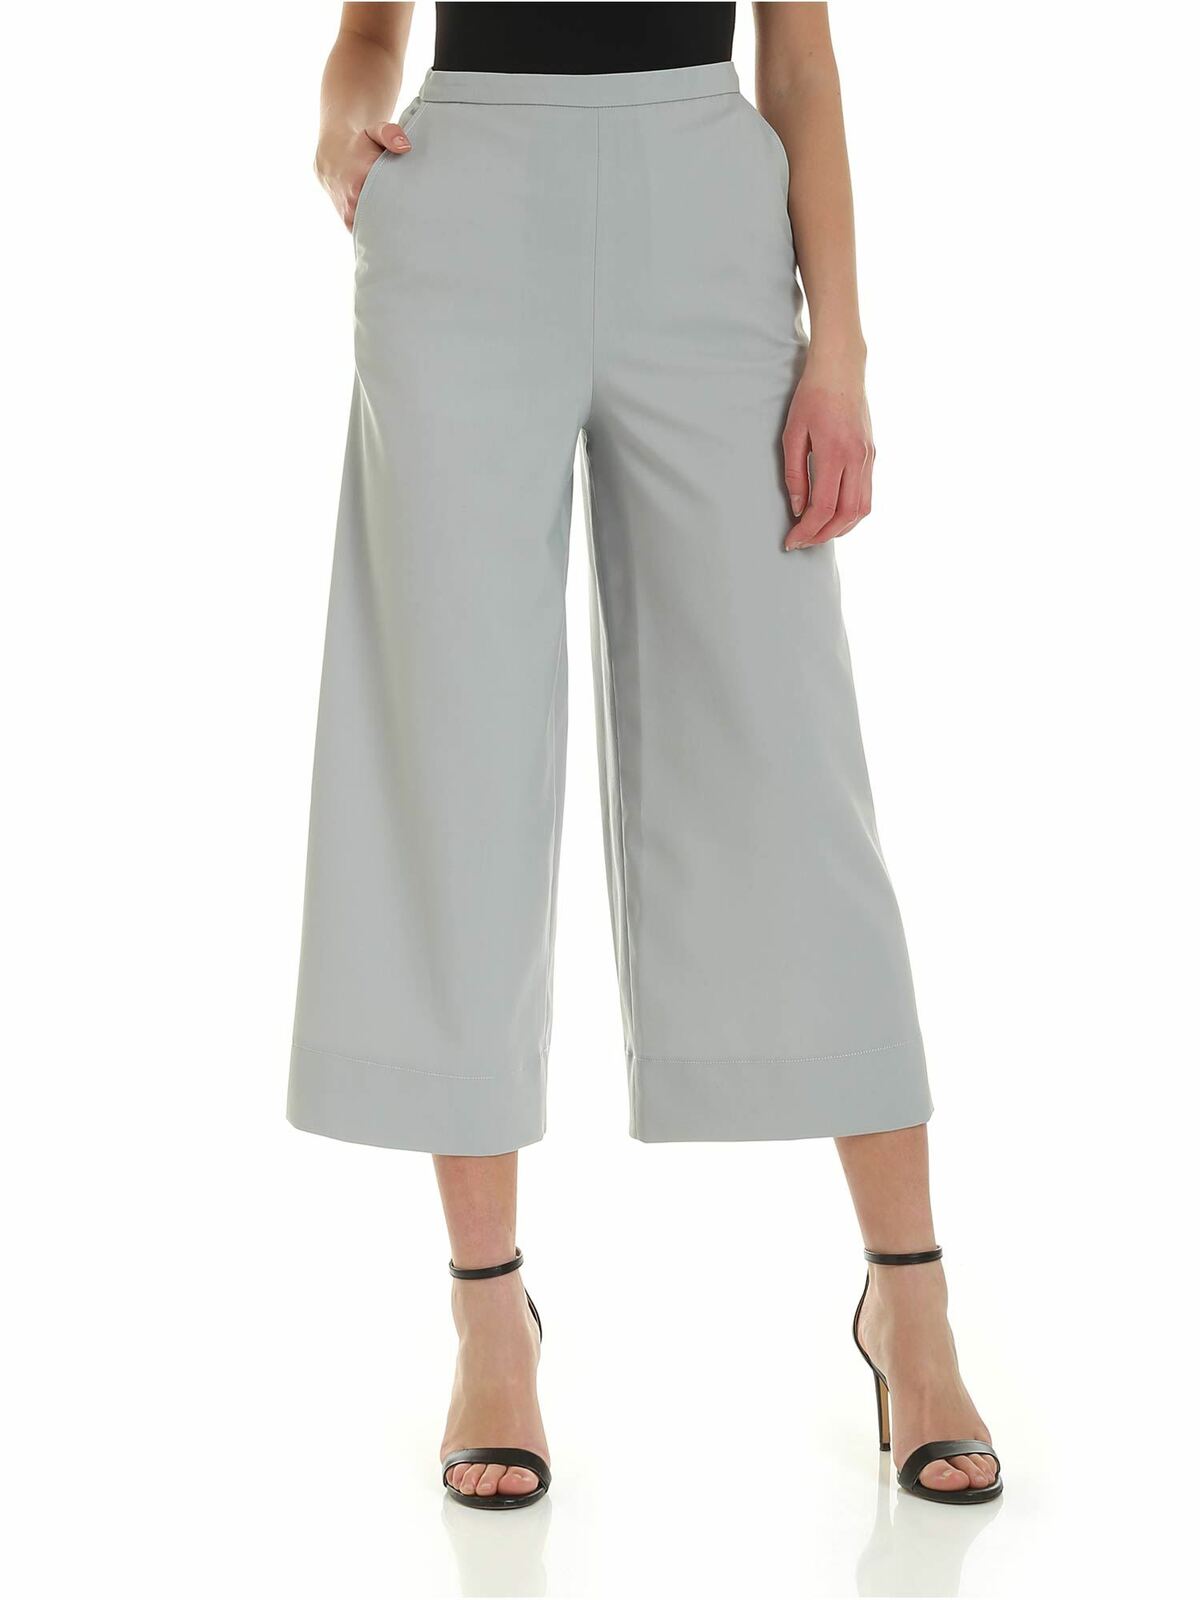 See By Chloé Cold Gray Culottes Pants